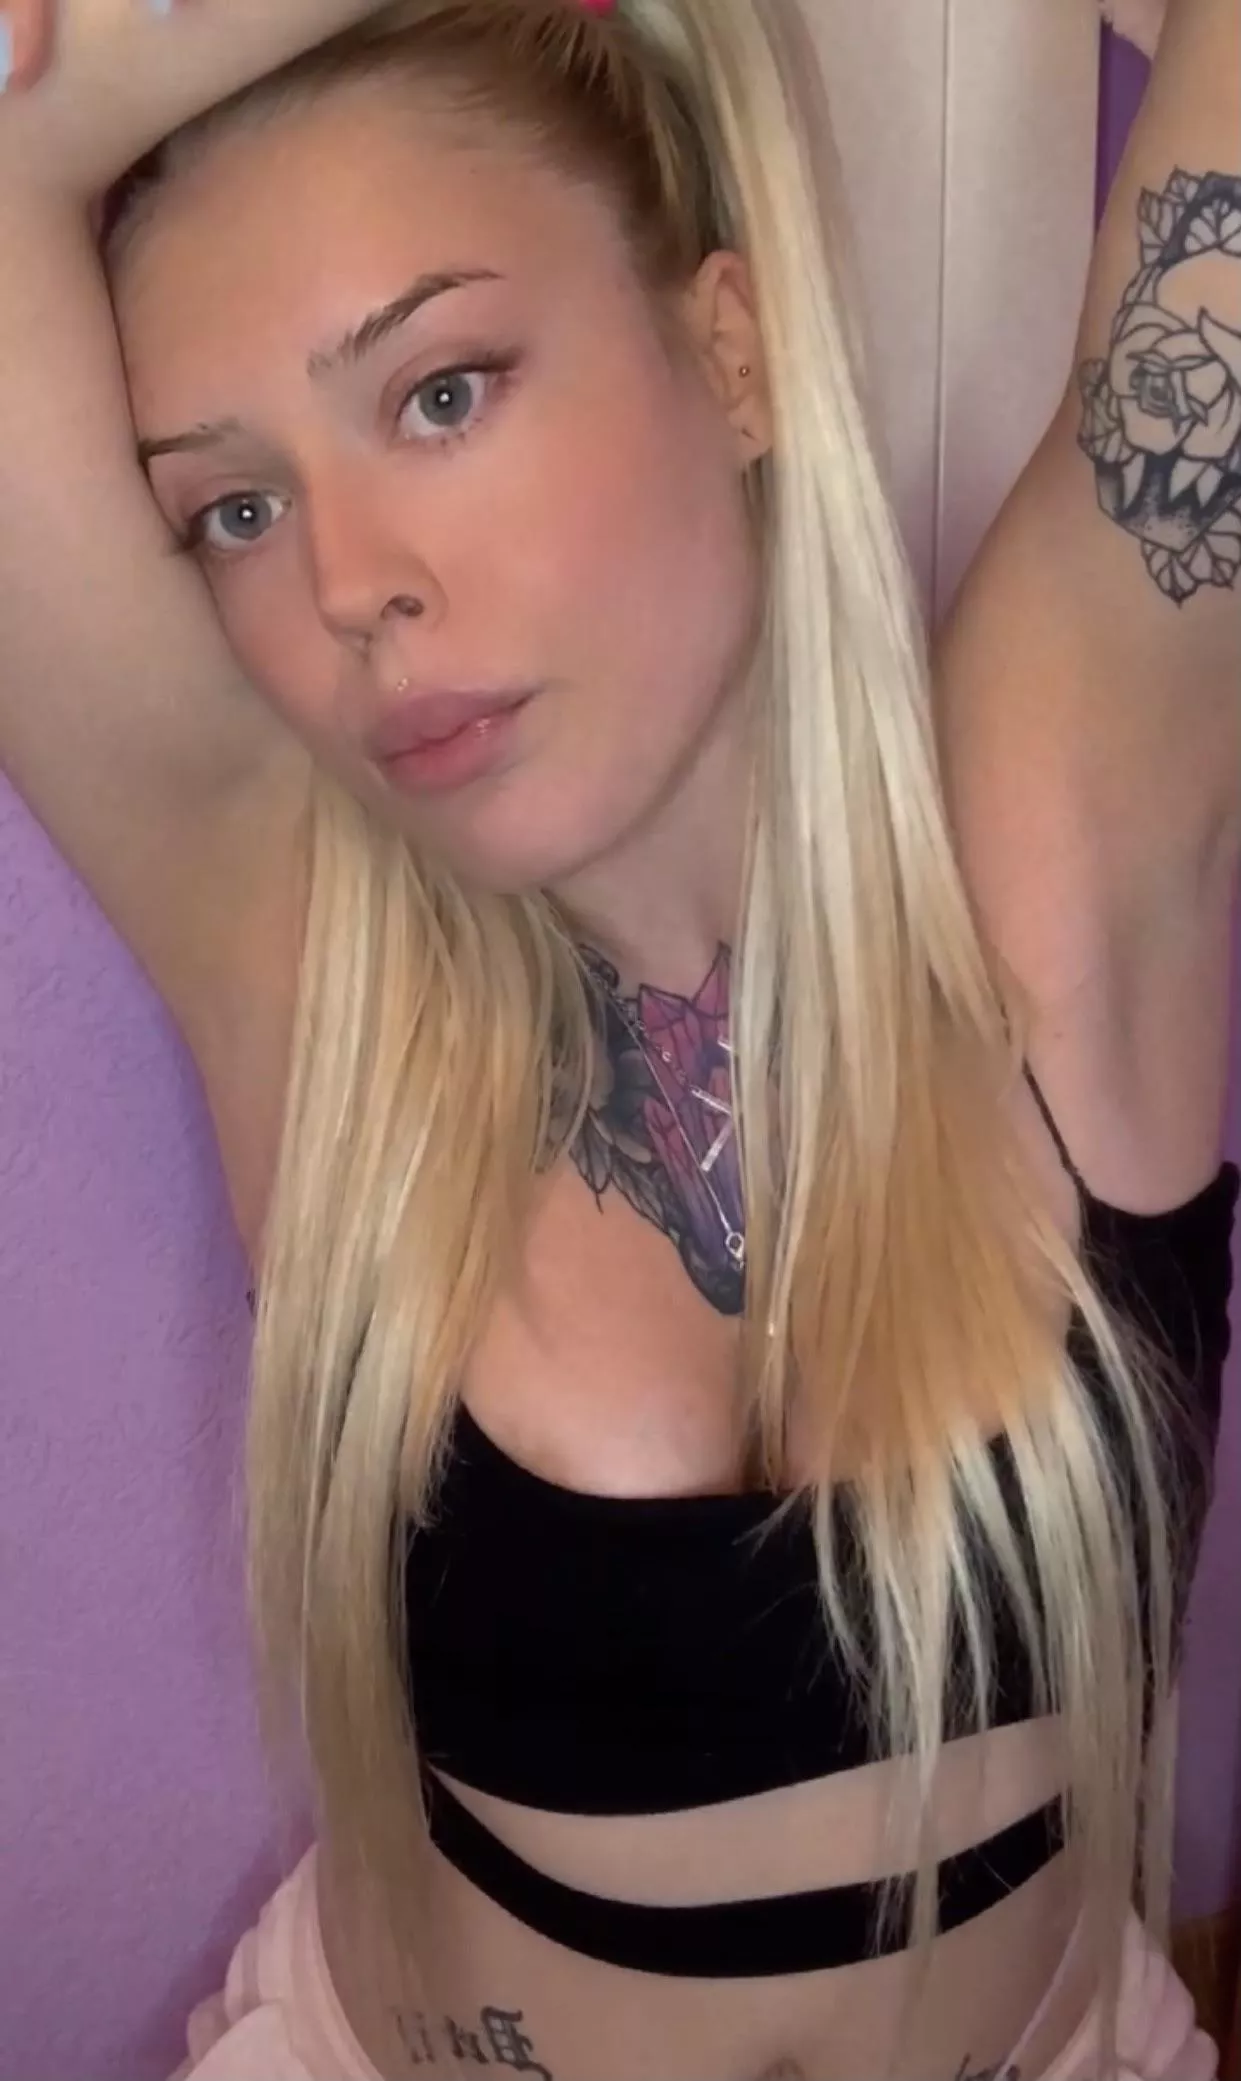 Free only fans vids